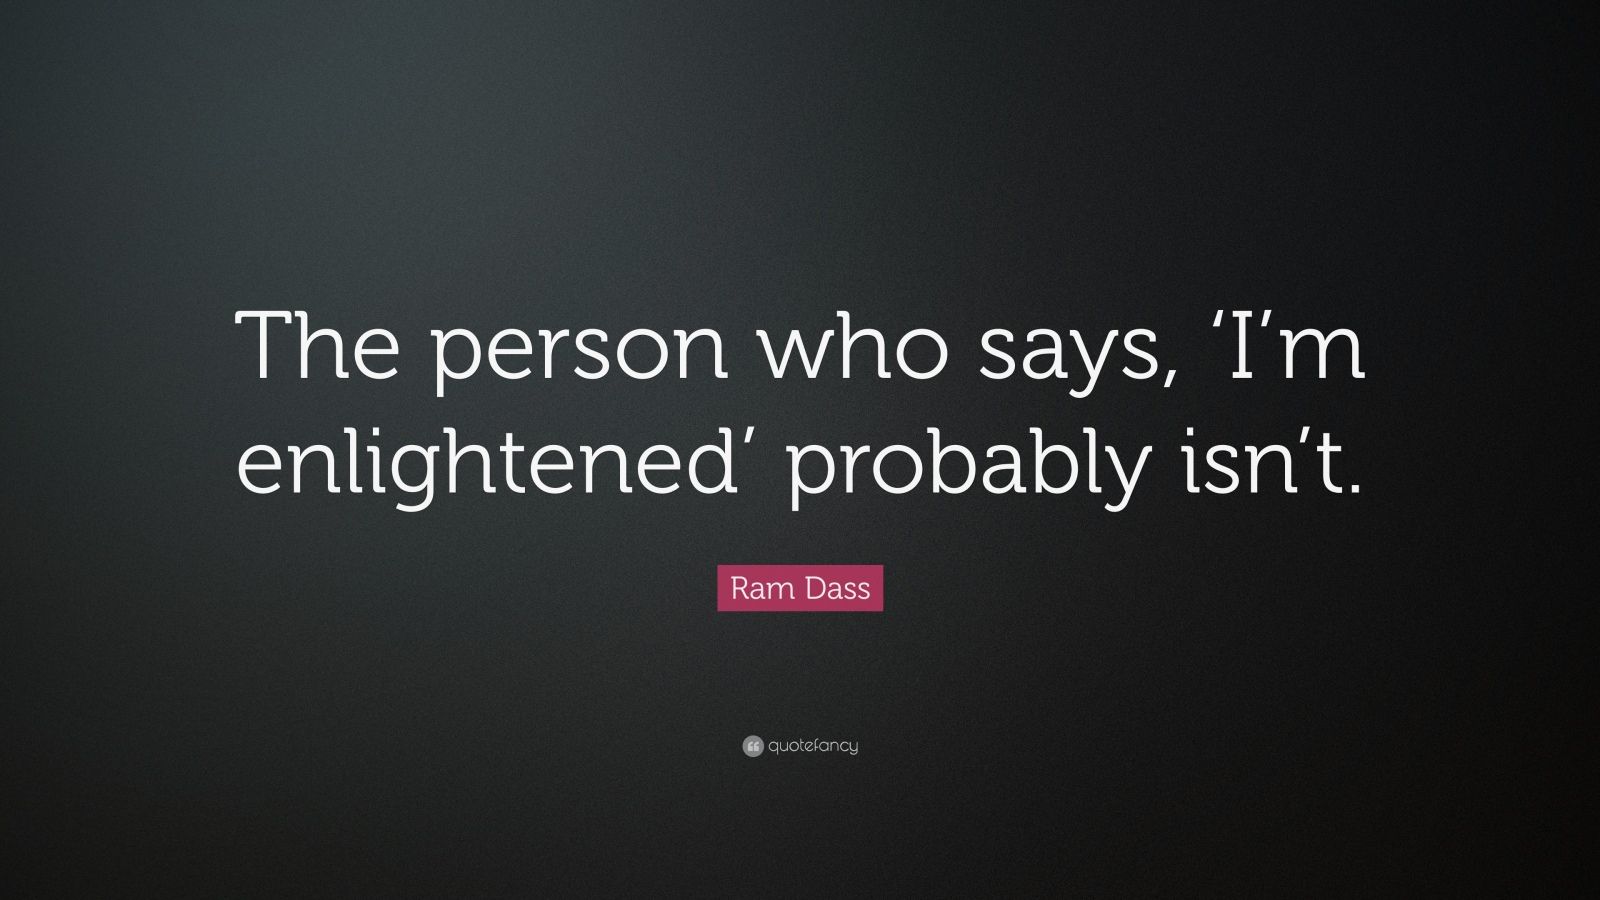 Ram Dass Quote: “The person who says, ‘I’m enlightened’ probably isn’t.”